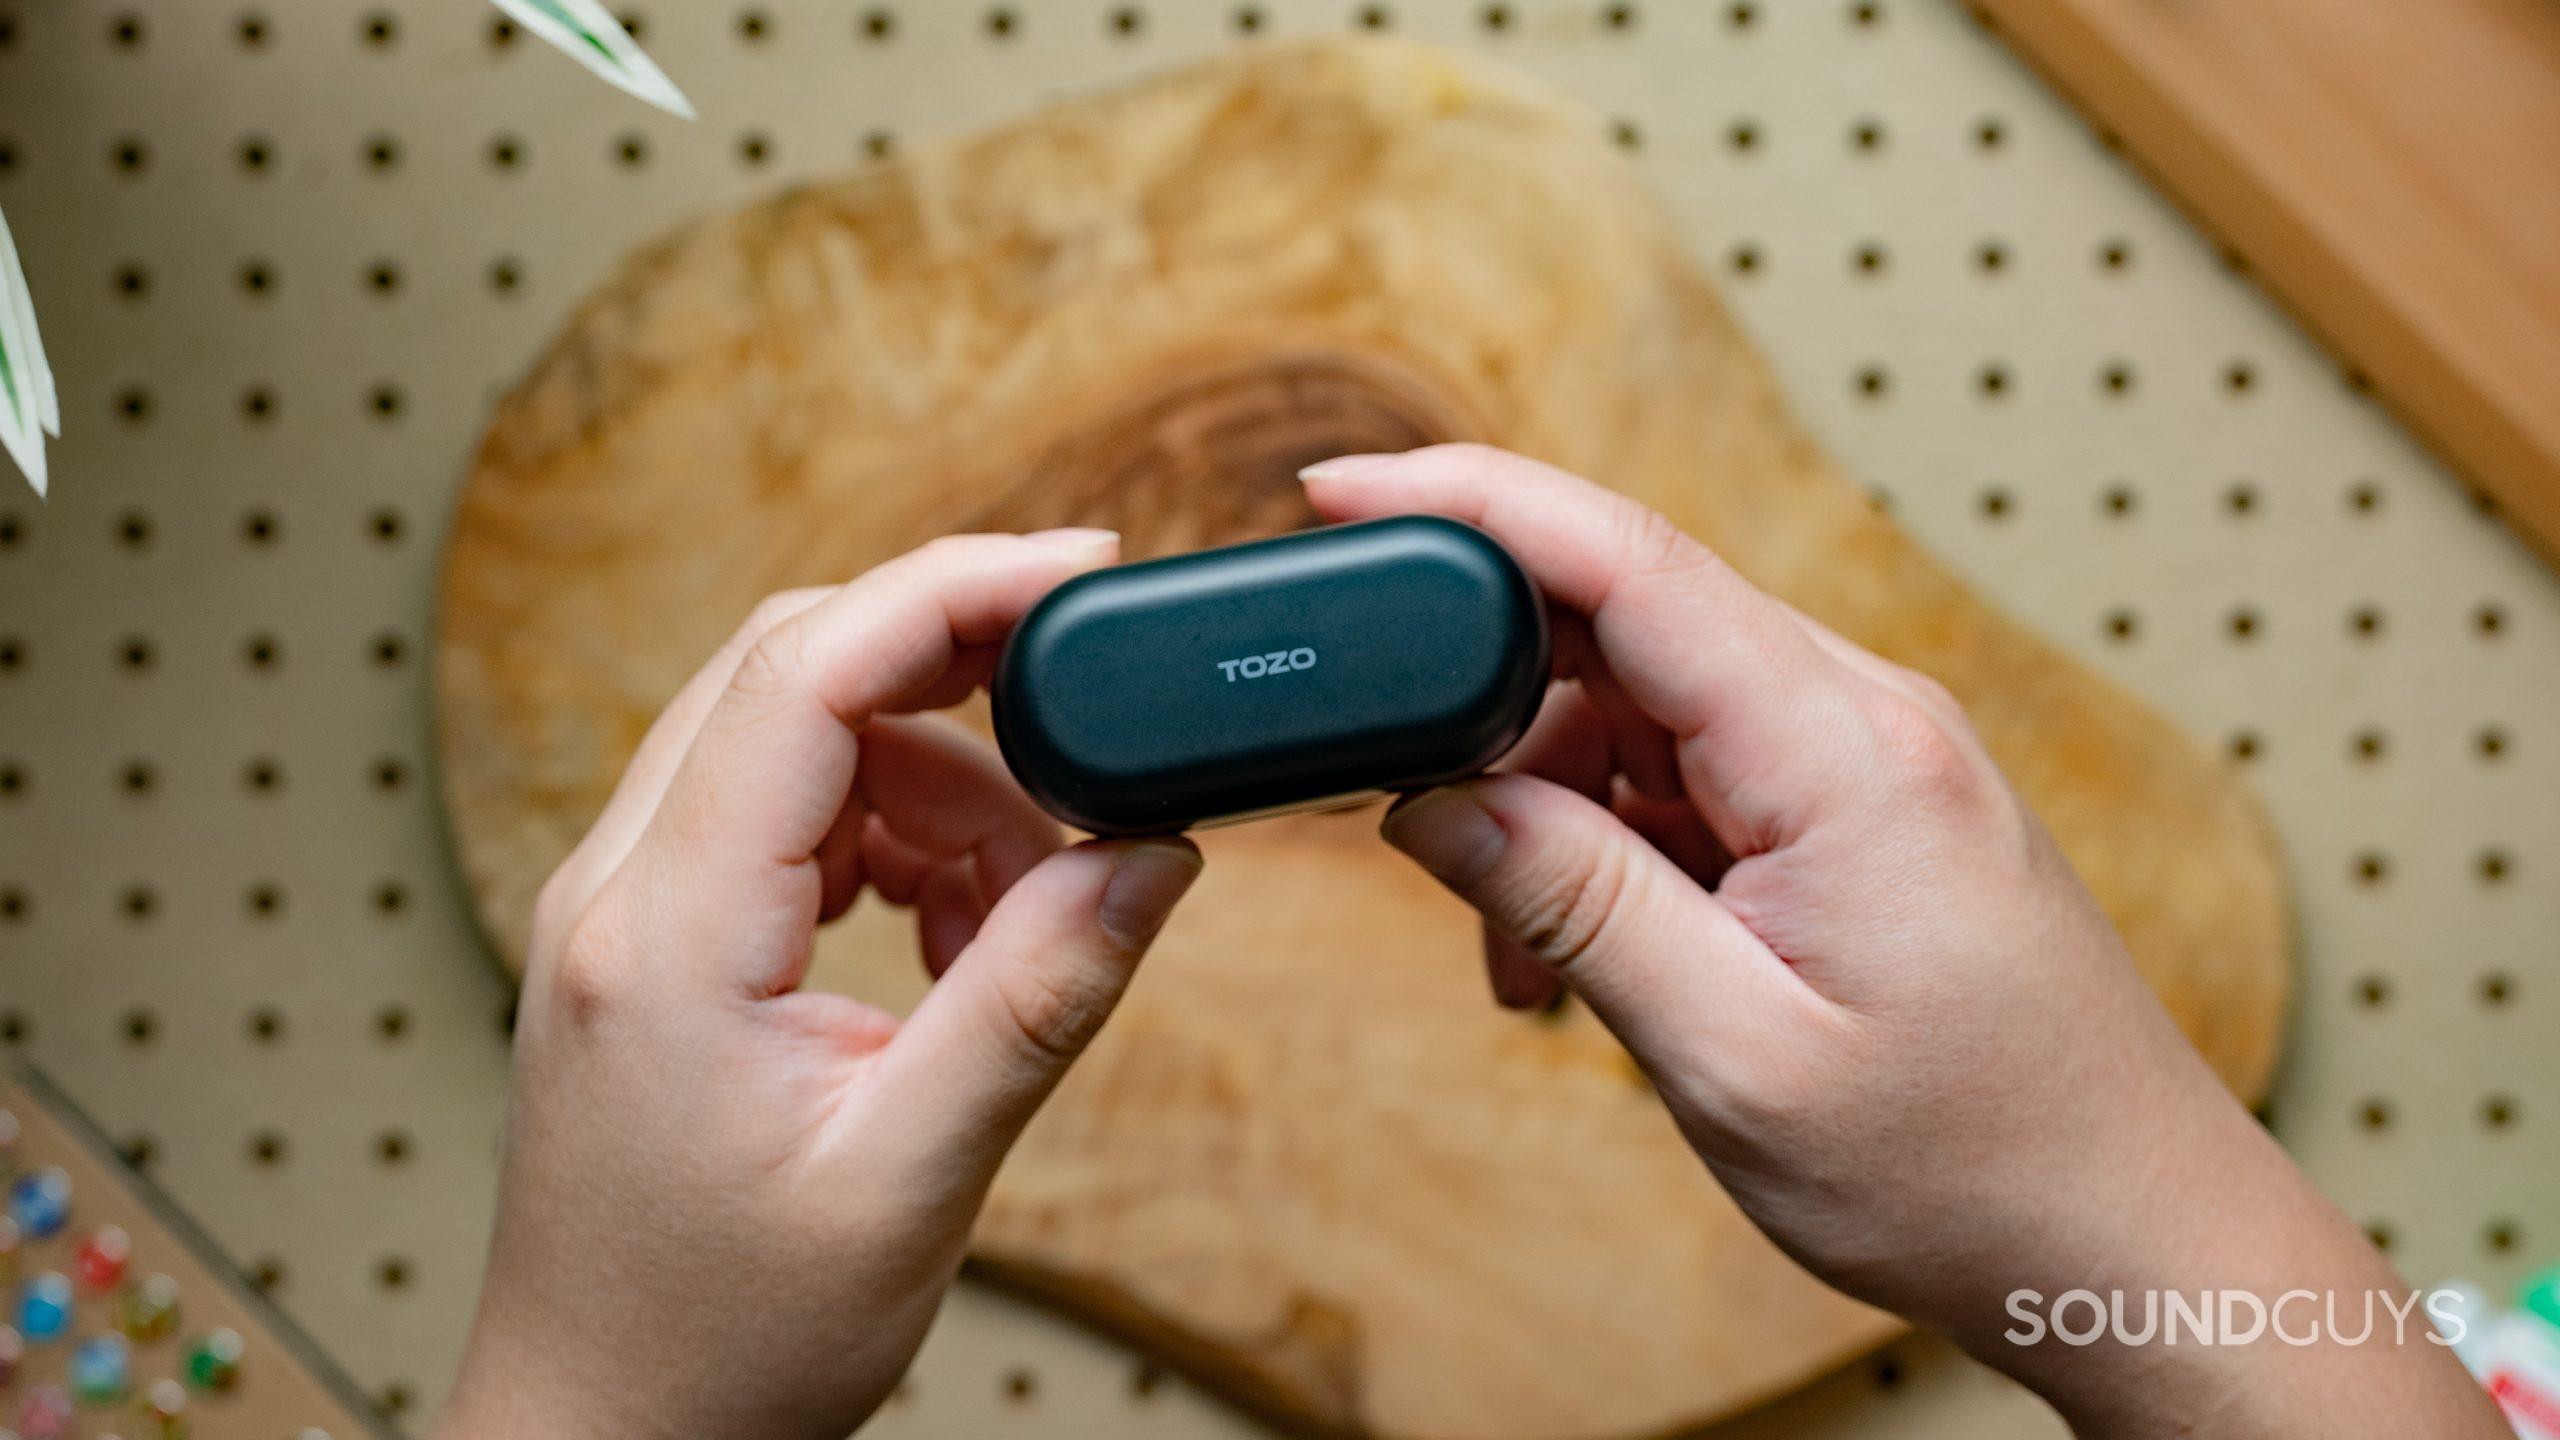 The TOZO T12 charging case being held up by two hands over a table.